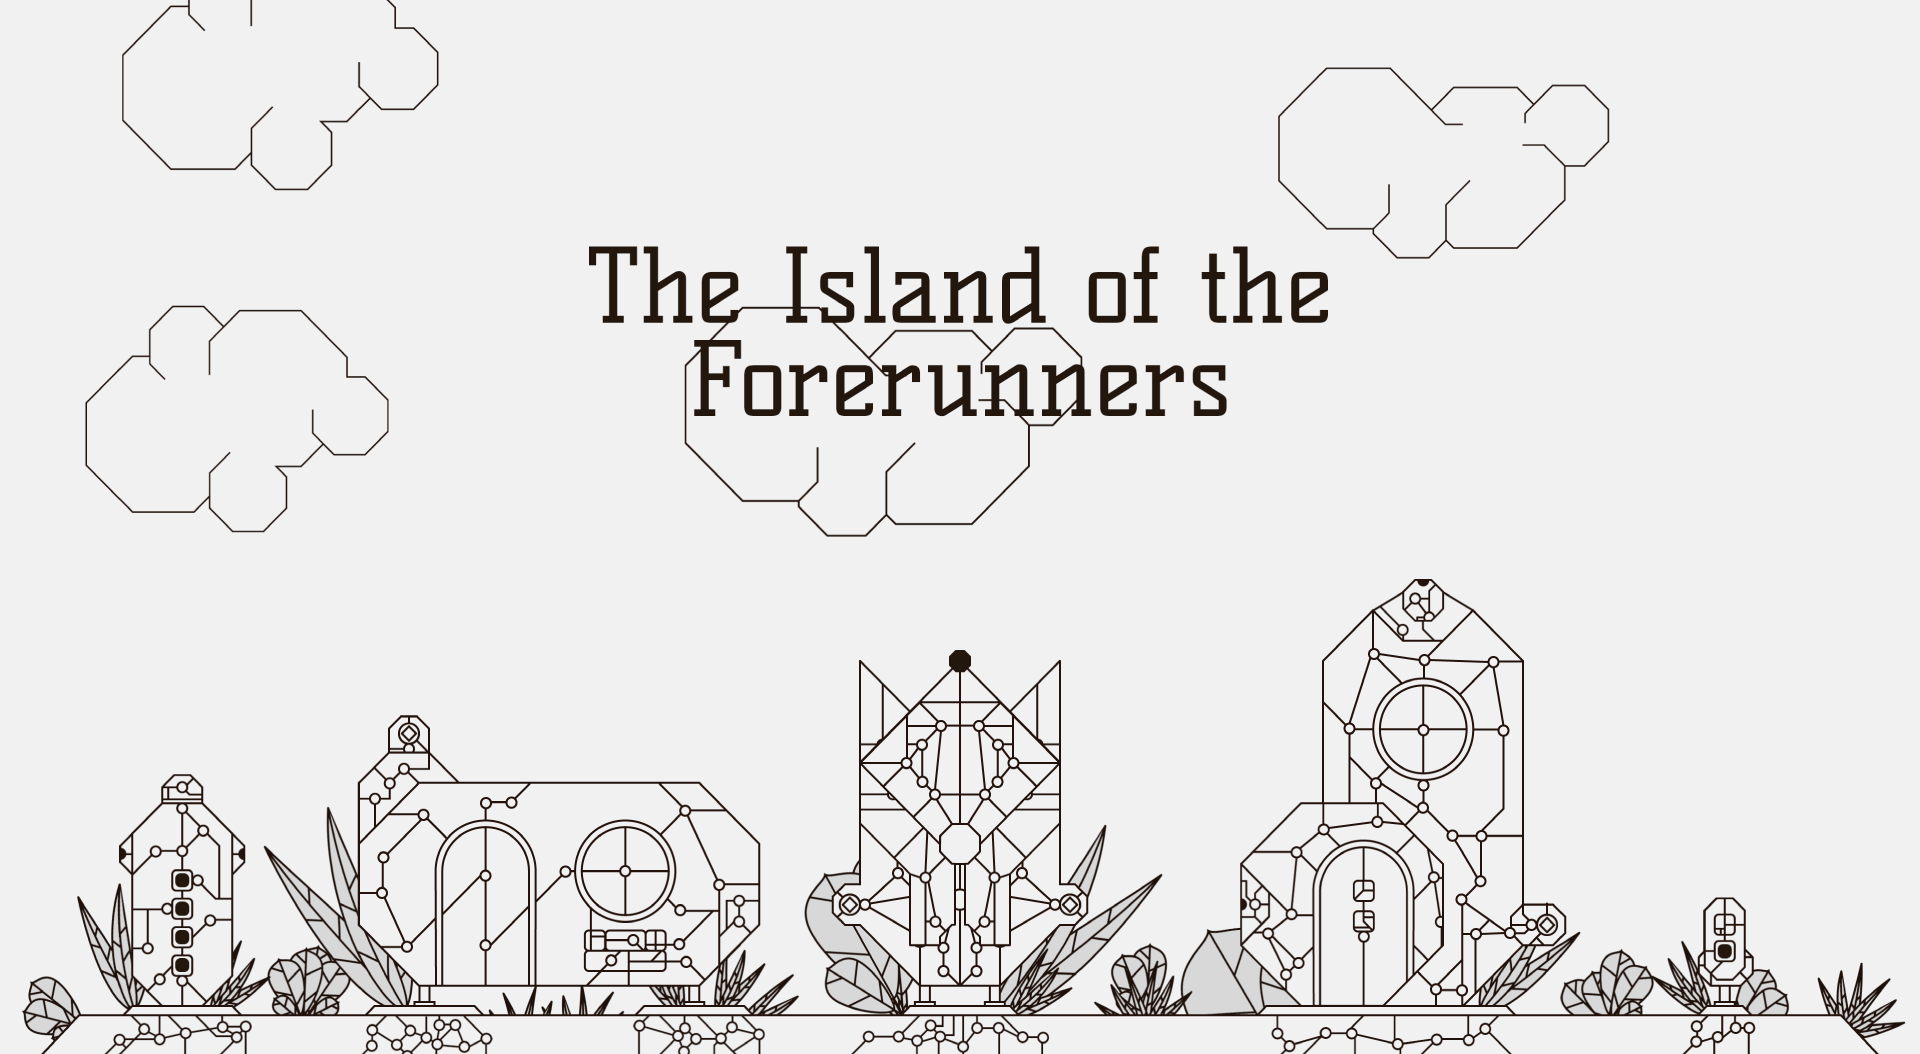 The Island of the Forerunners